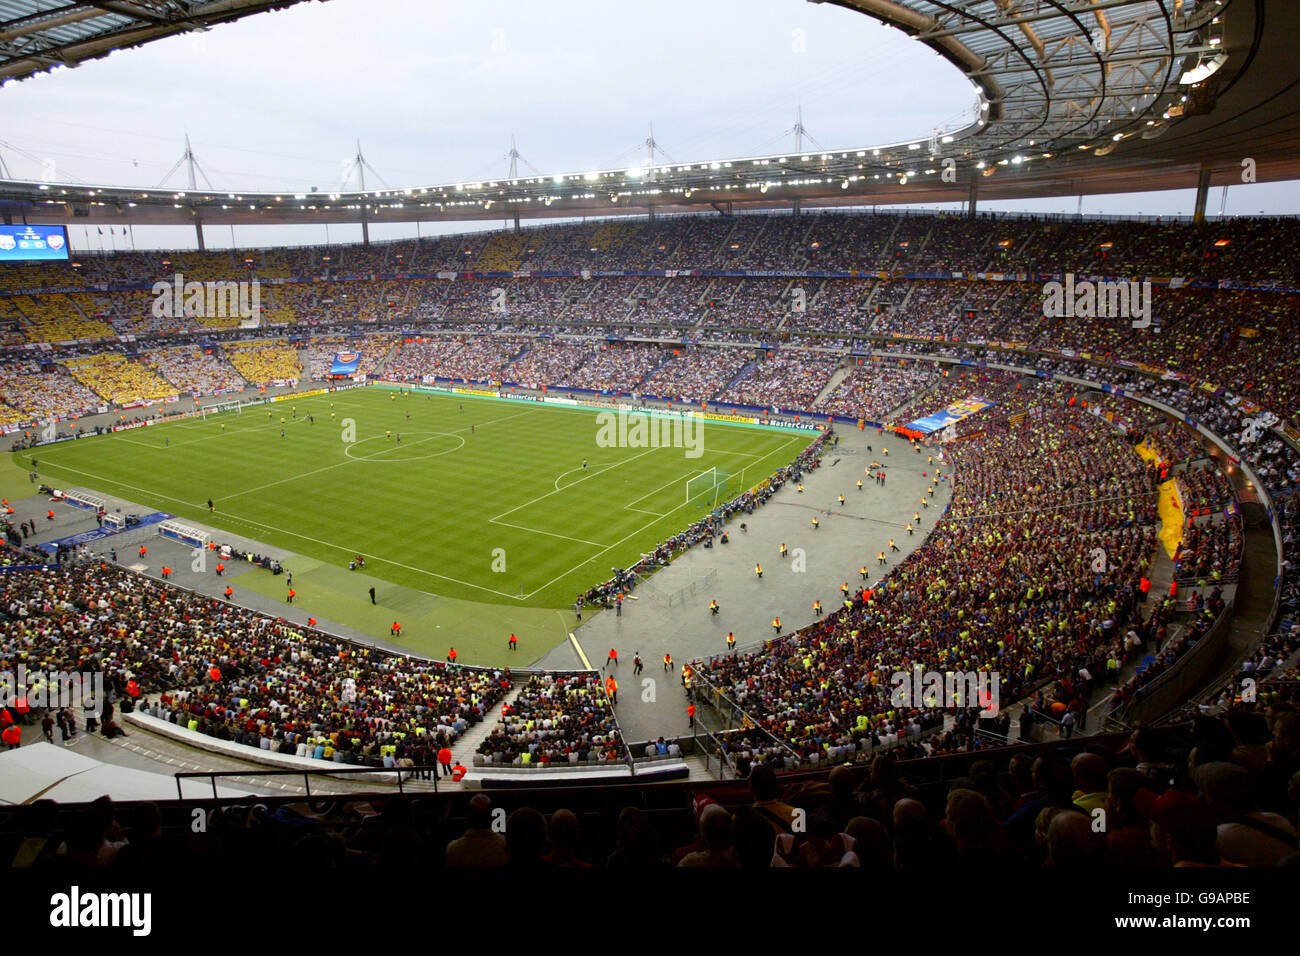 A general view of the Stade de France, venue for the UEFA Champions League  Final Stock Photo - Alamy